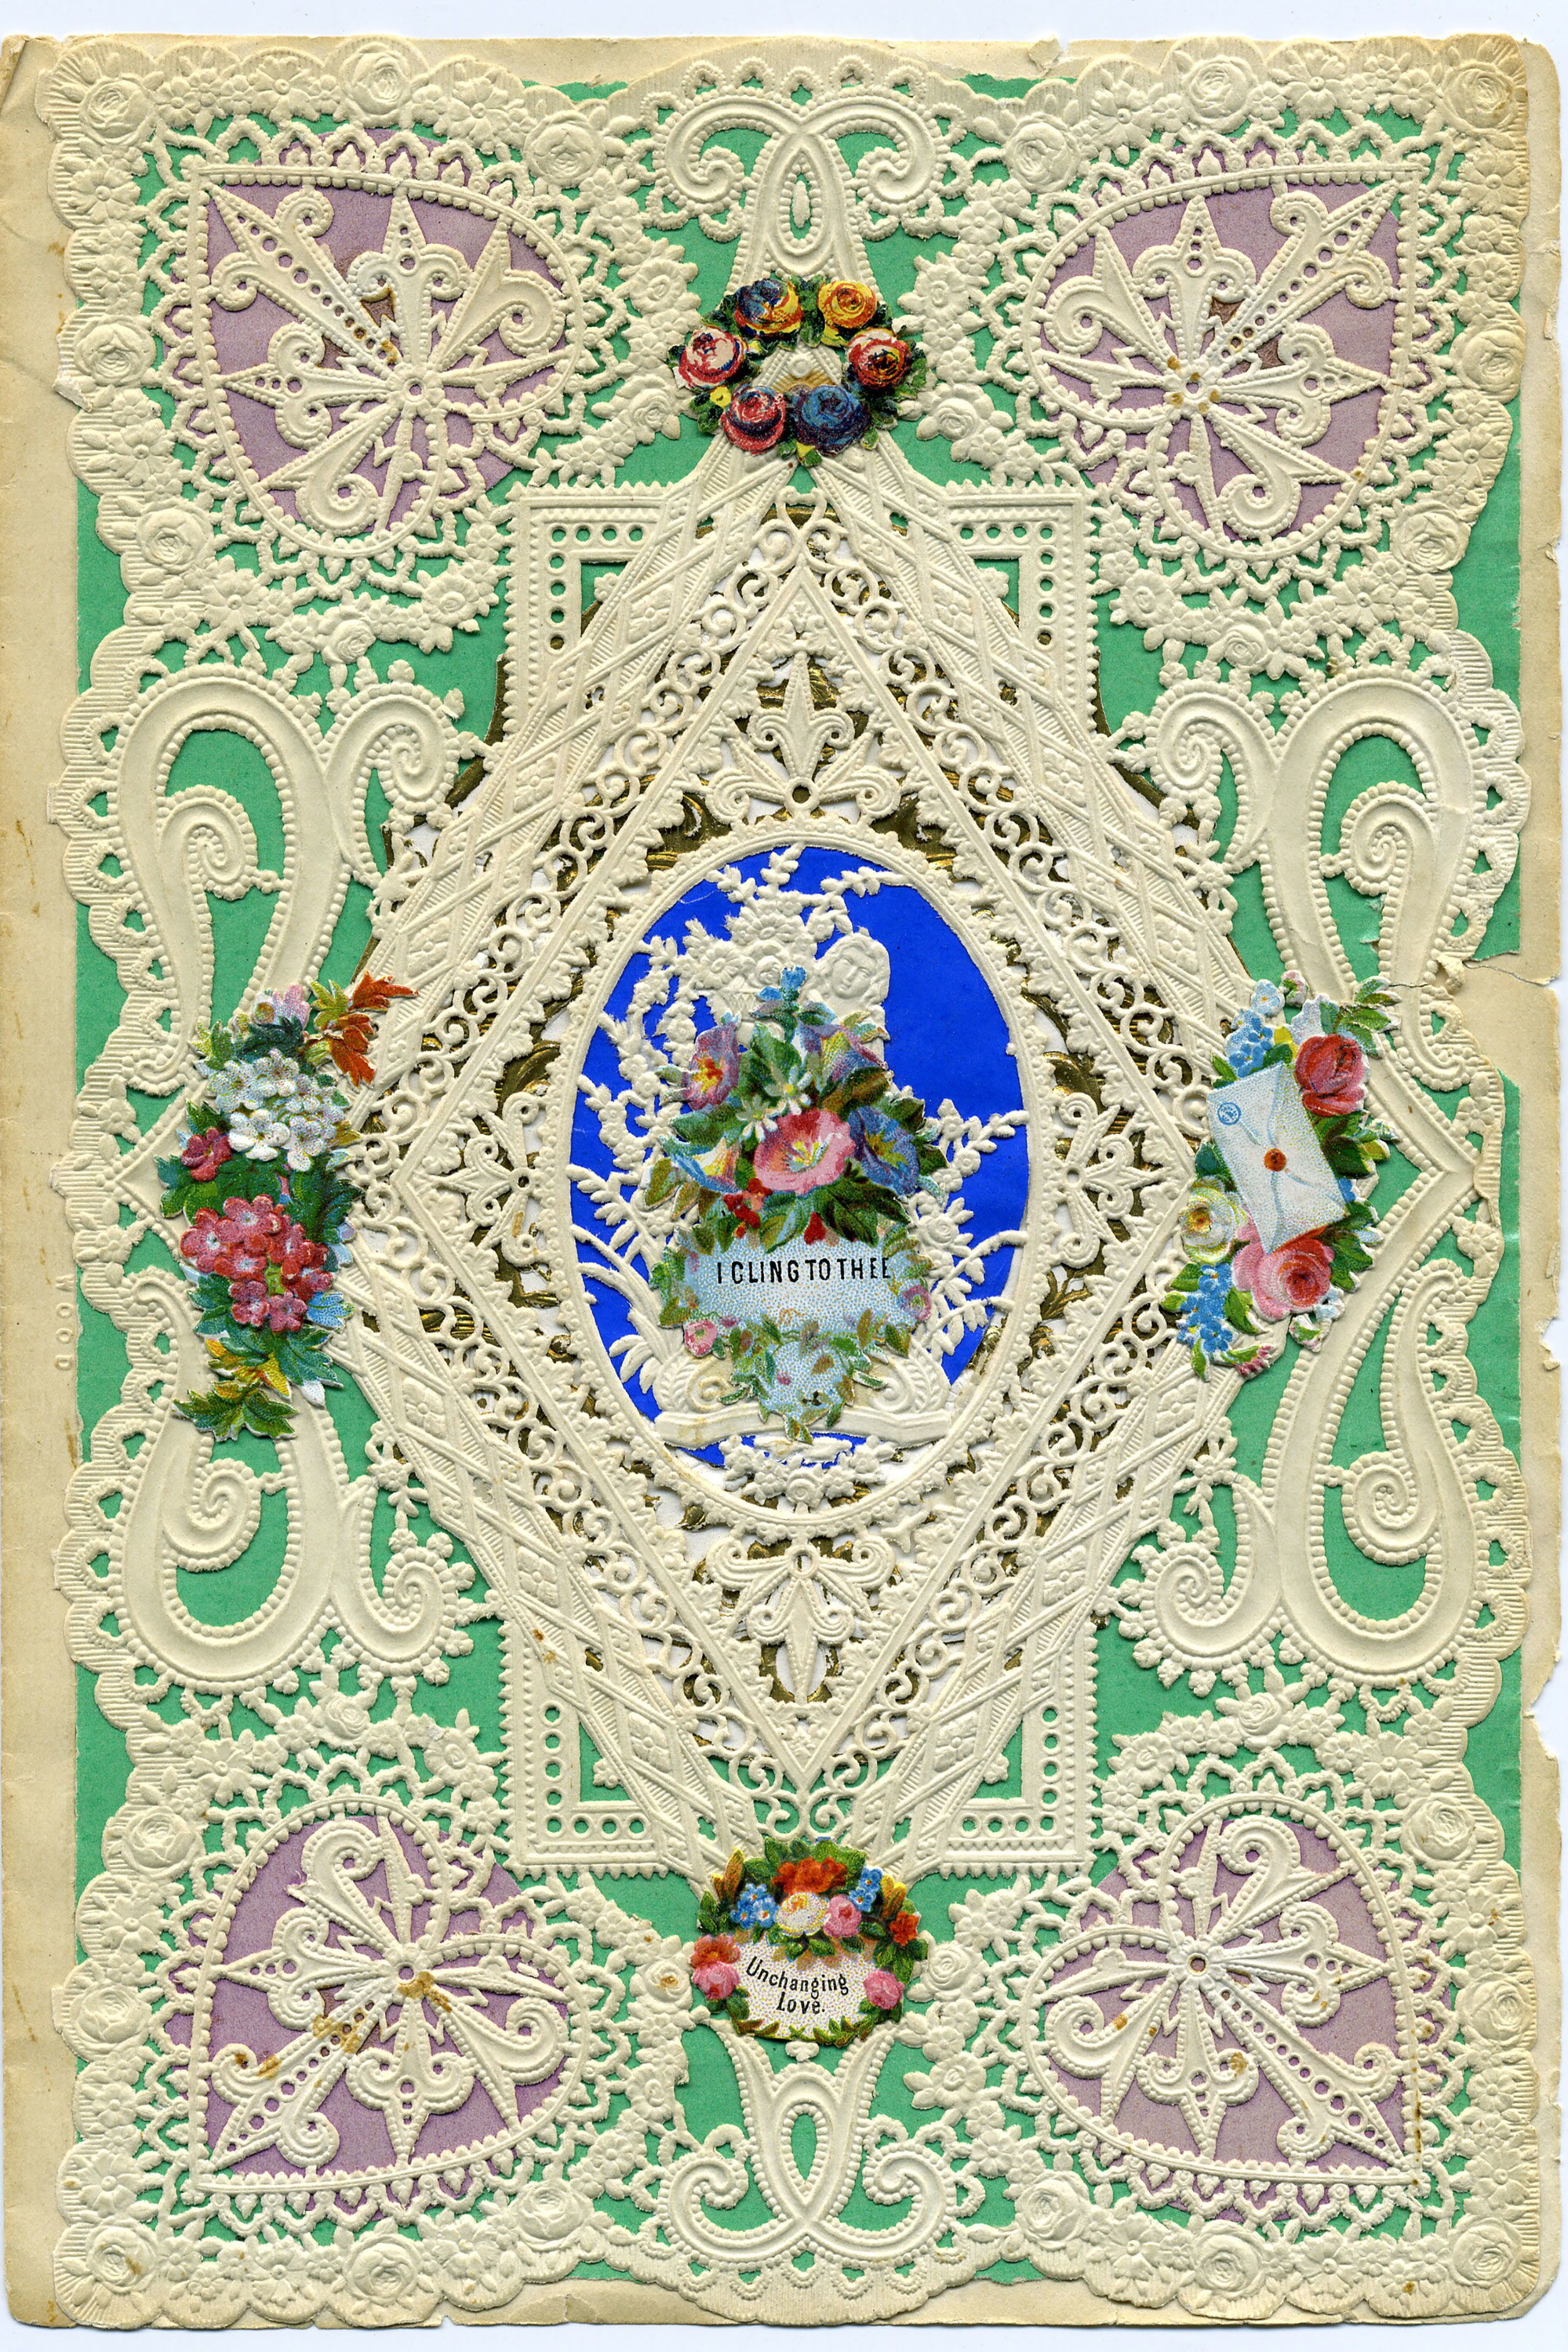 Brightly colored paper placed beneath the lace accentuates the design.